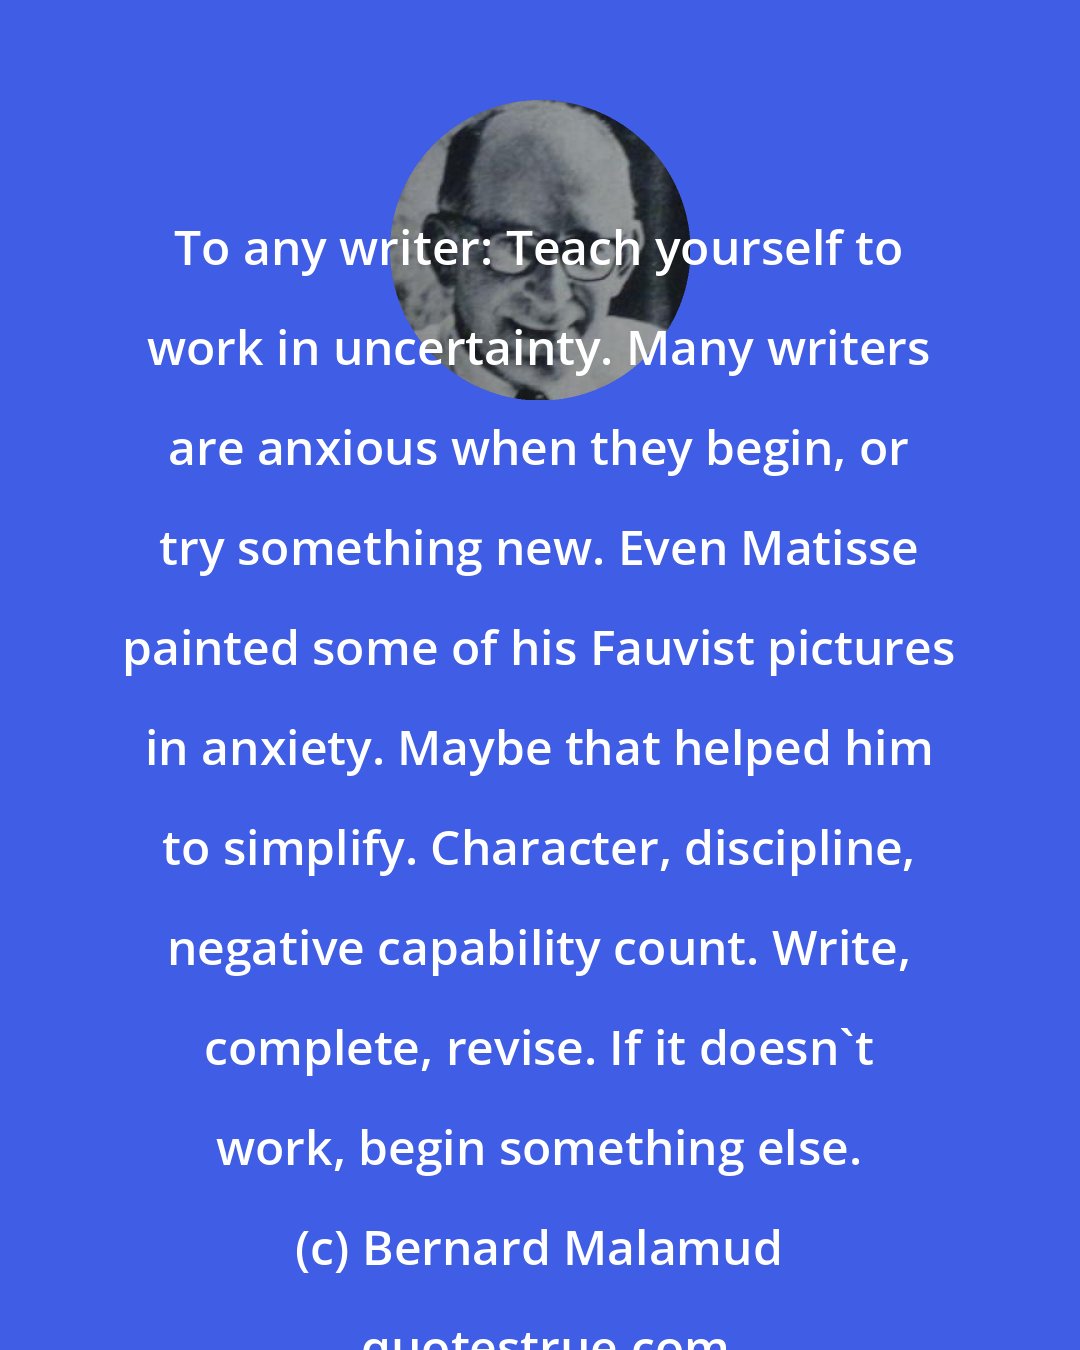 Bernard Malamud: To any writer: Teach yourself to work in uncertainty. Many writers are anxious when they begin, or try something new. Even Matisse painted some of his Fauvist pictures in anxiety. Maybe that helped him to simplify. Character, discipline, negative capability count. Write, complete, revise. If it doesn't work, begin something else.